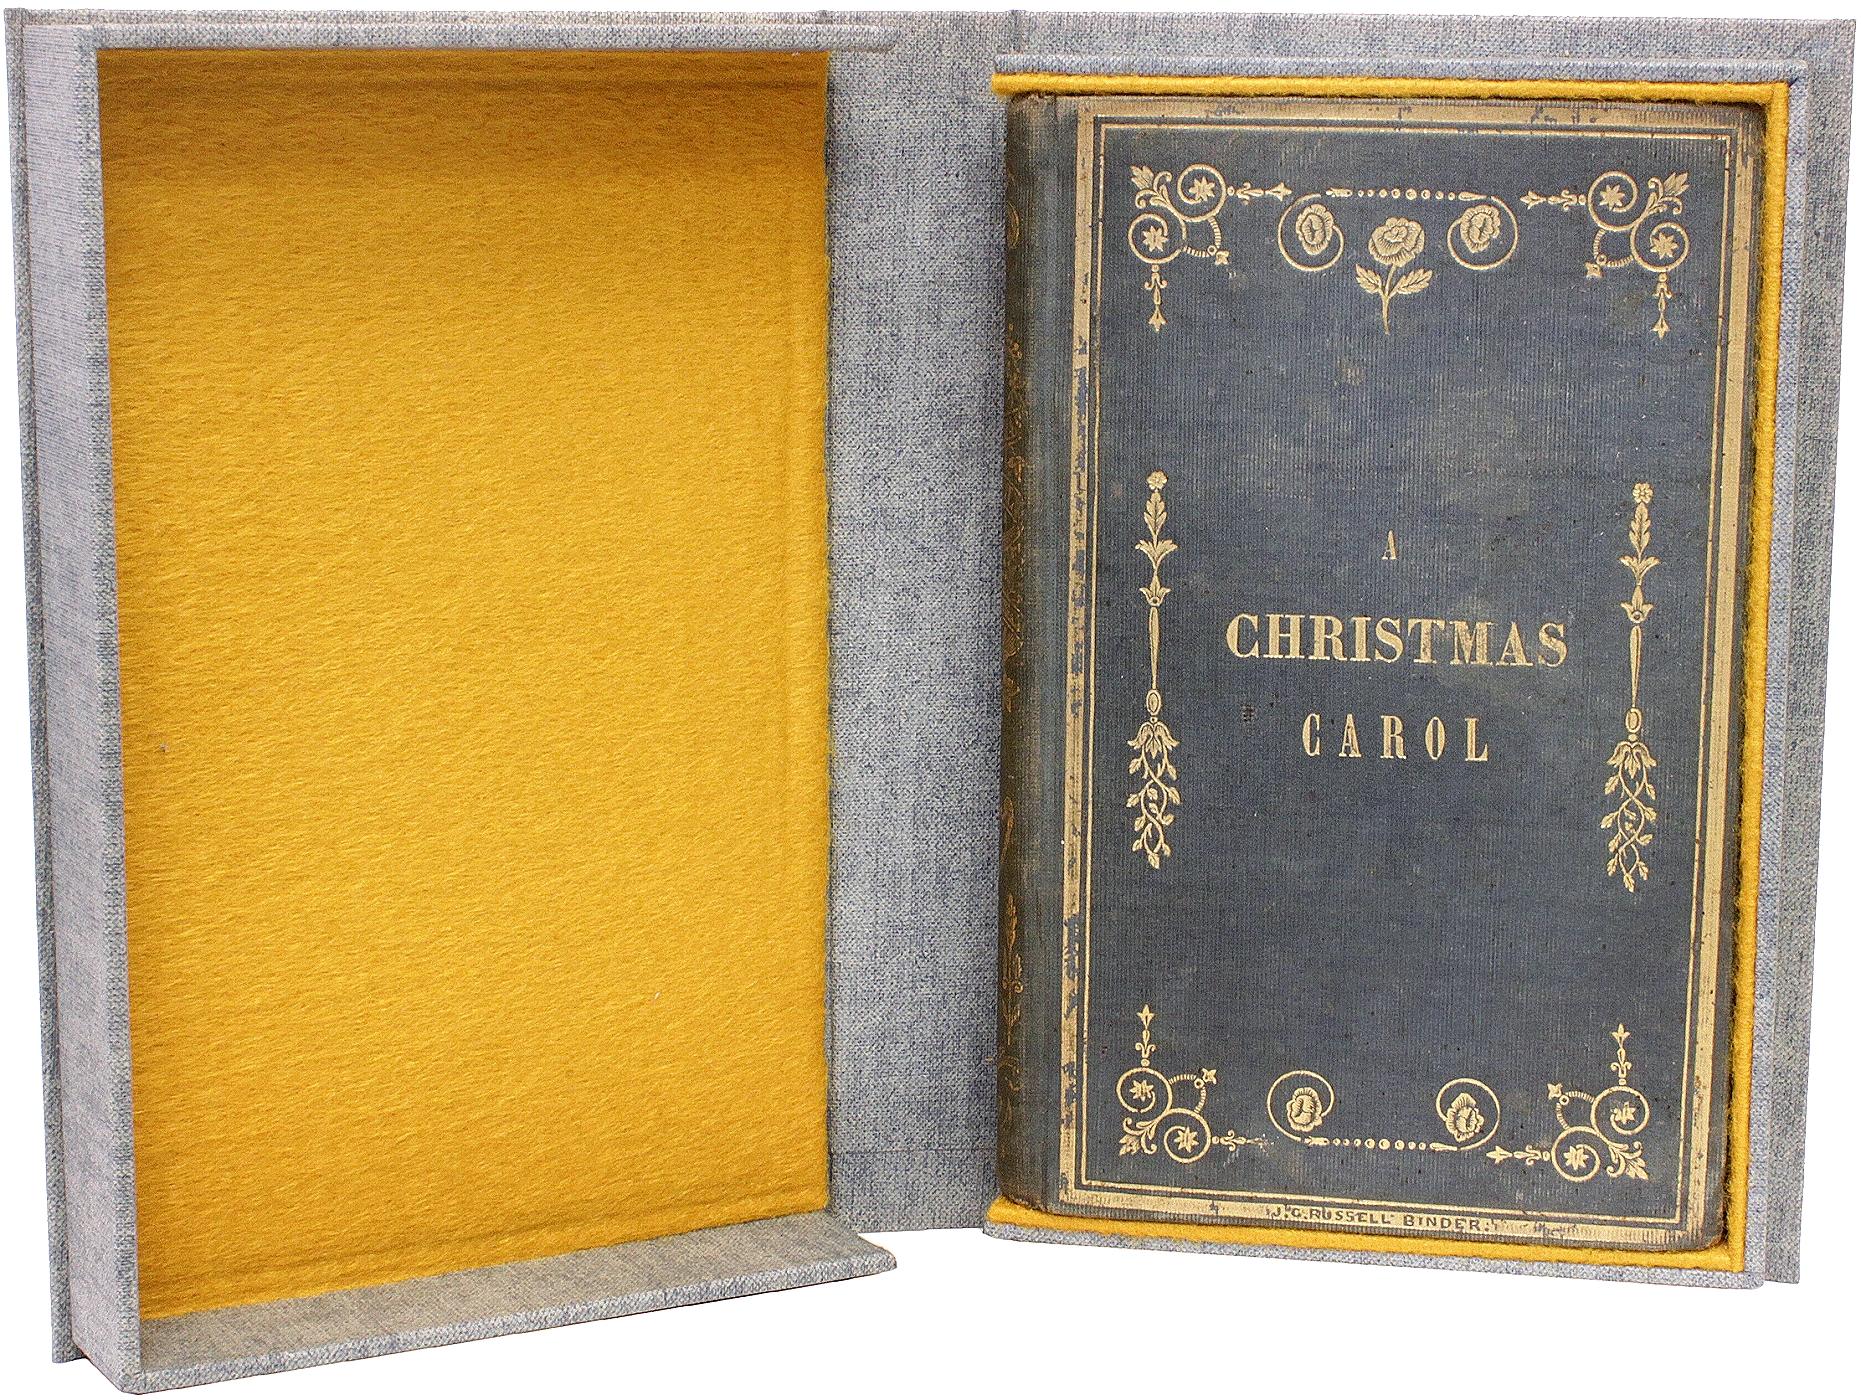 Charles DICKENS - A Christmas Carol - 1844 - FIRST AMERICAN EDITION - IN CLOTH 3